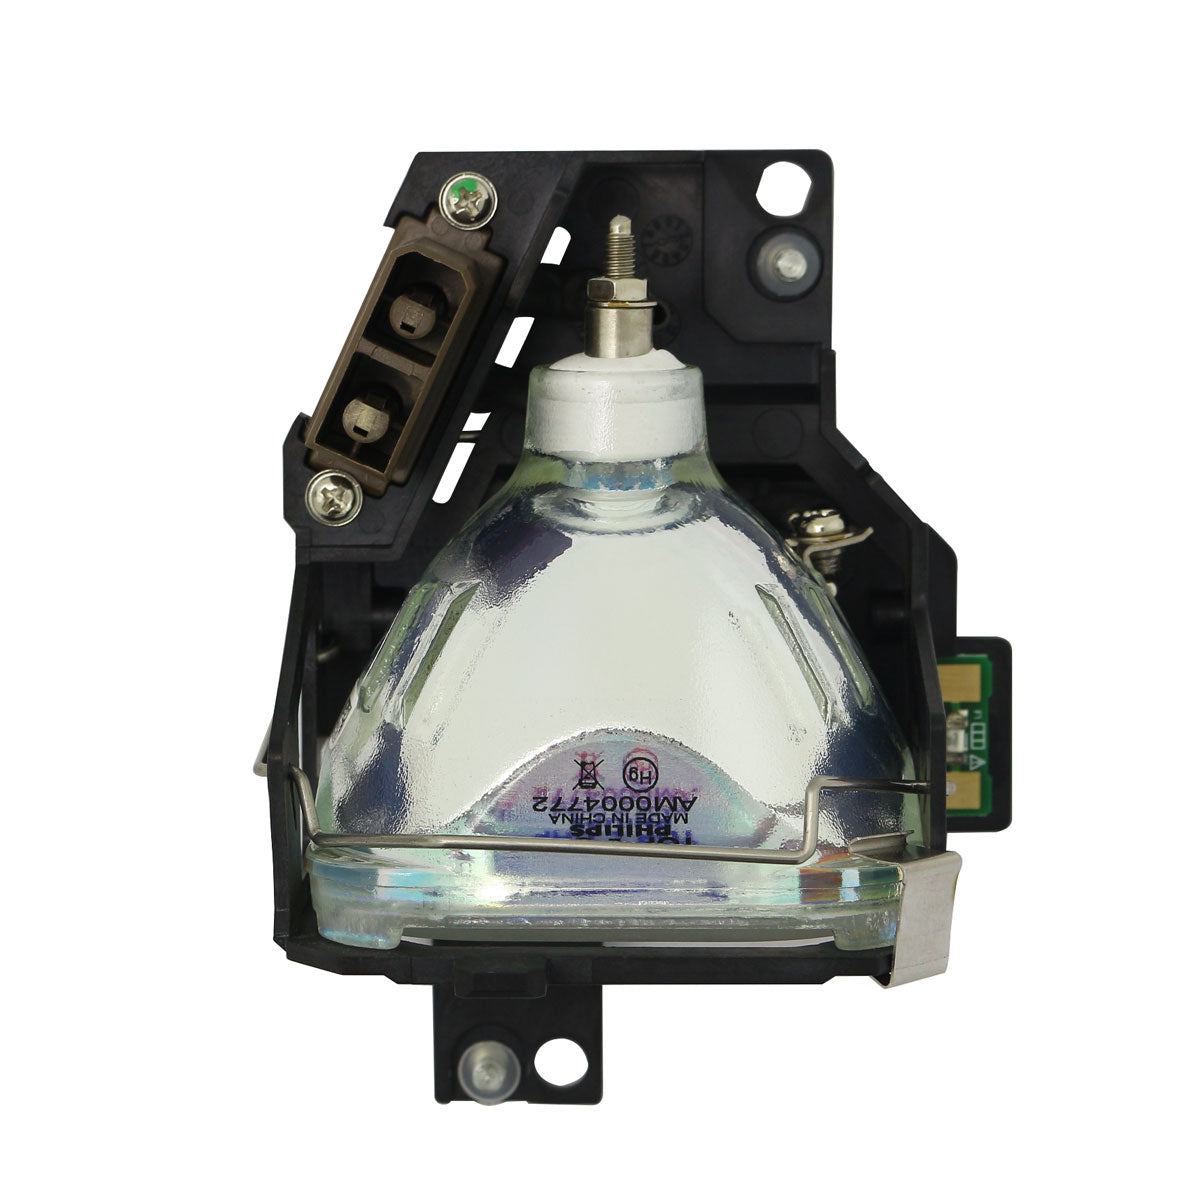 ASK Proxima ELPLP09 Philips Projector Lamp Module